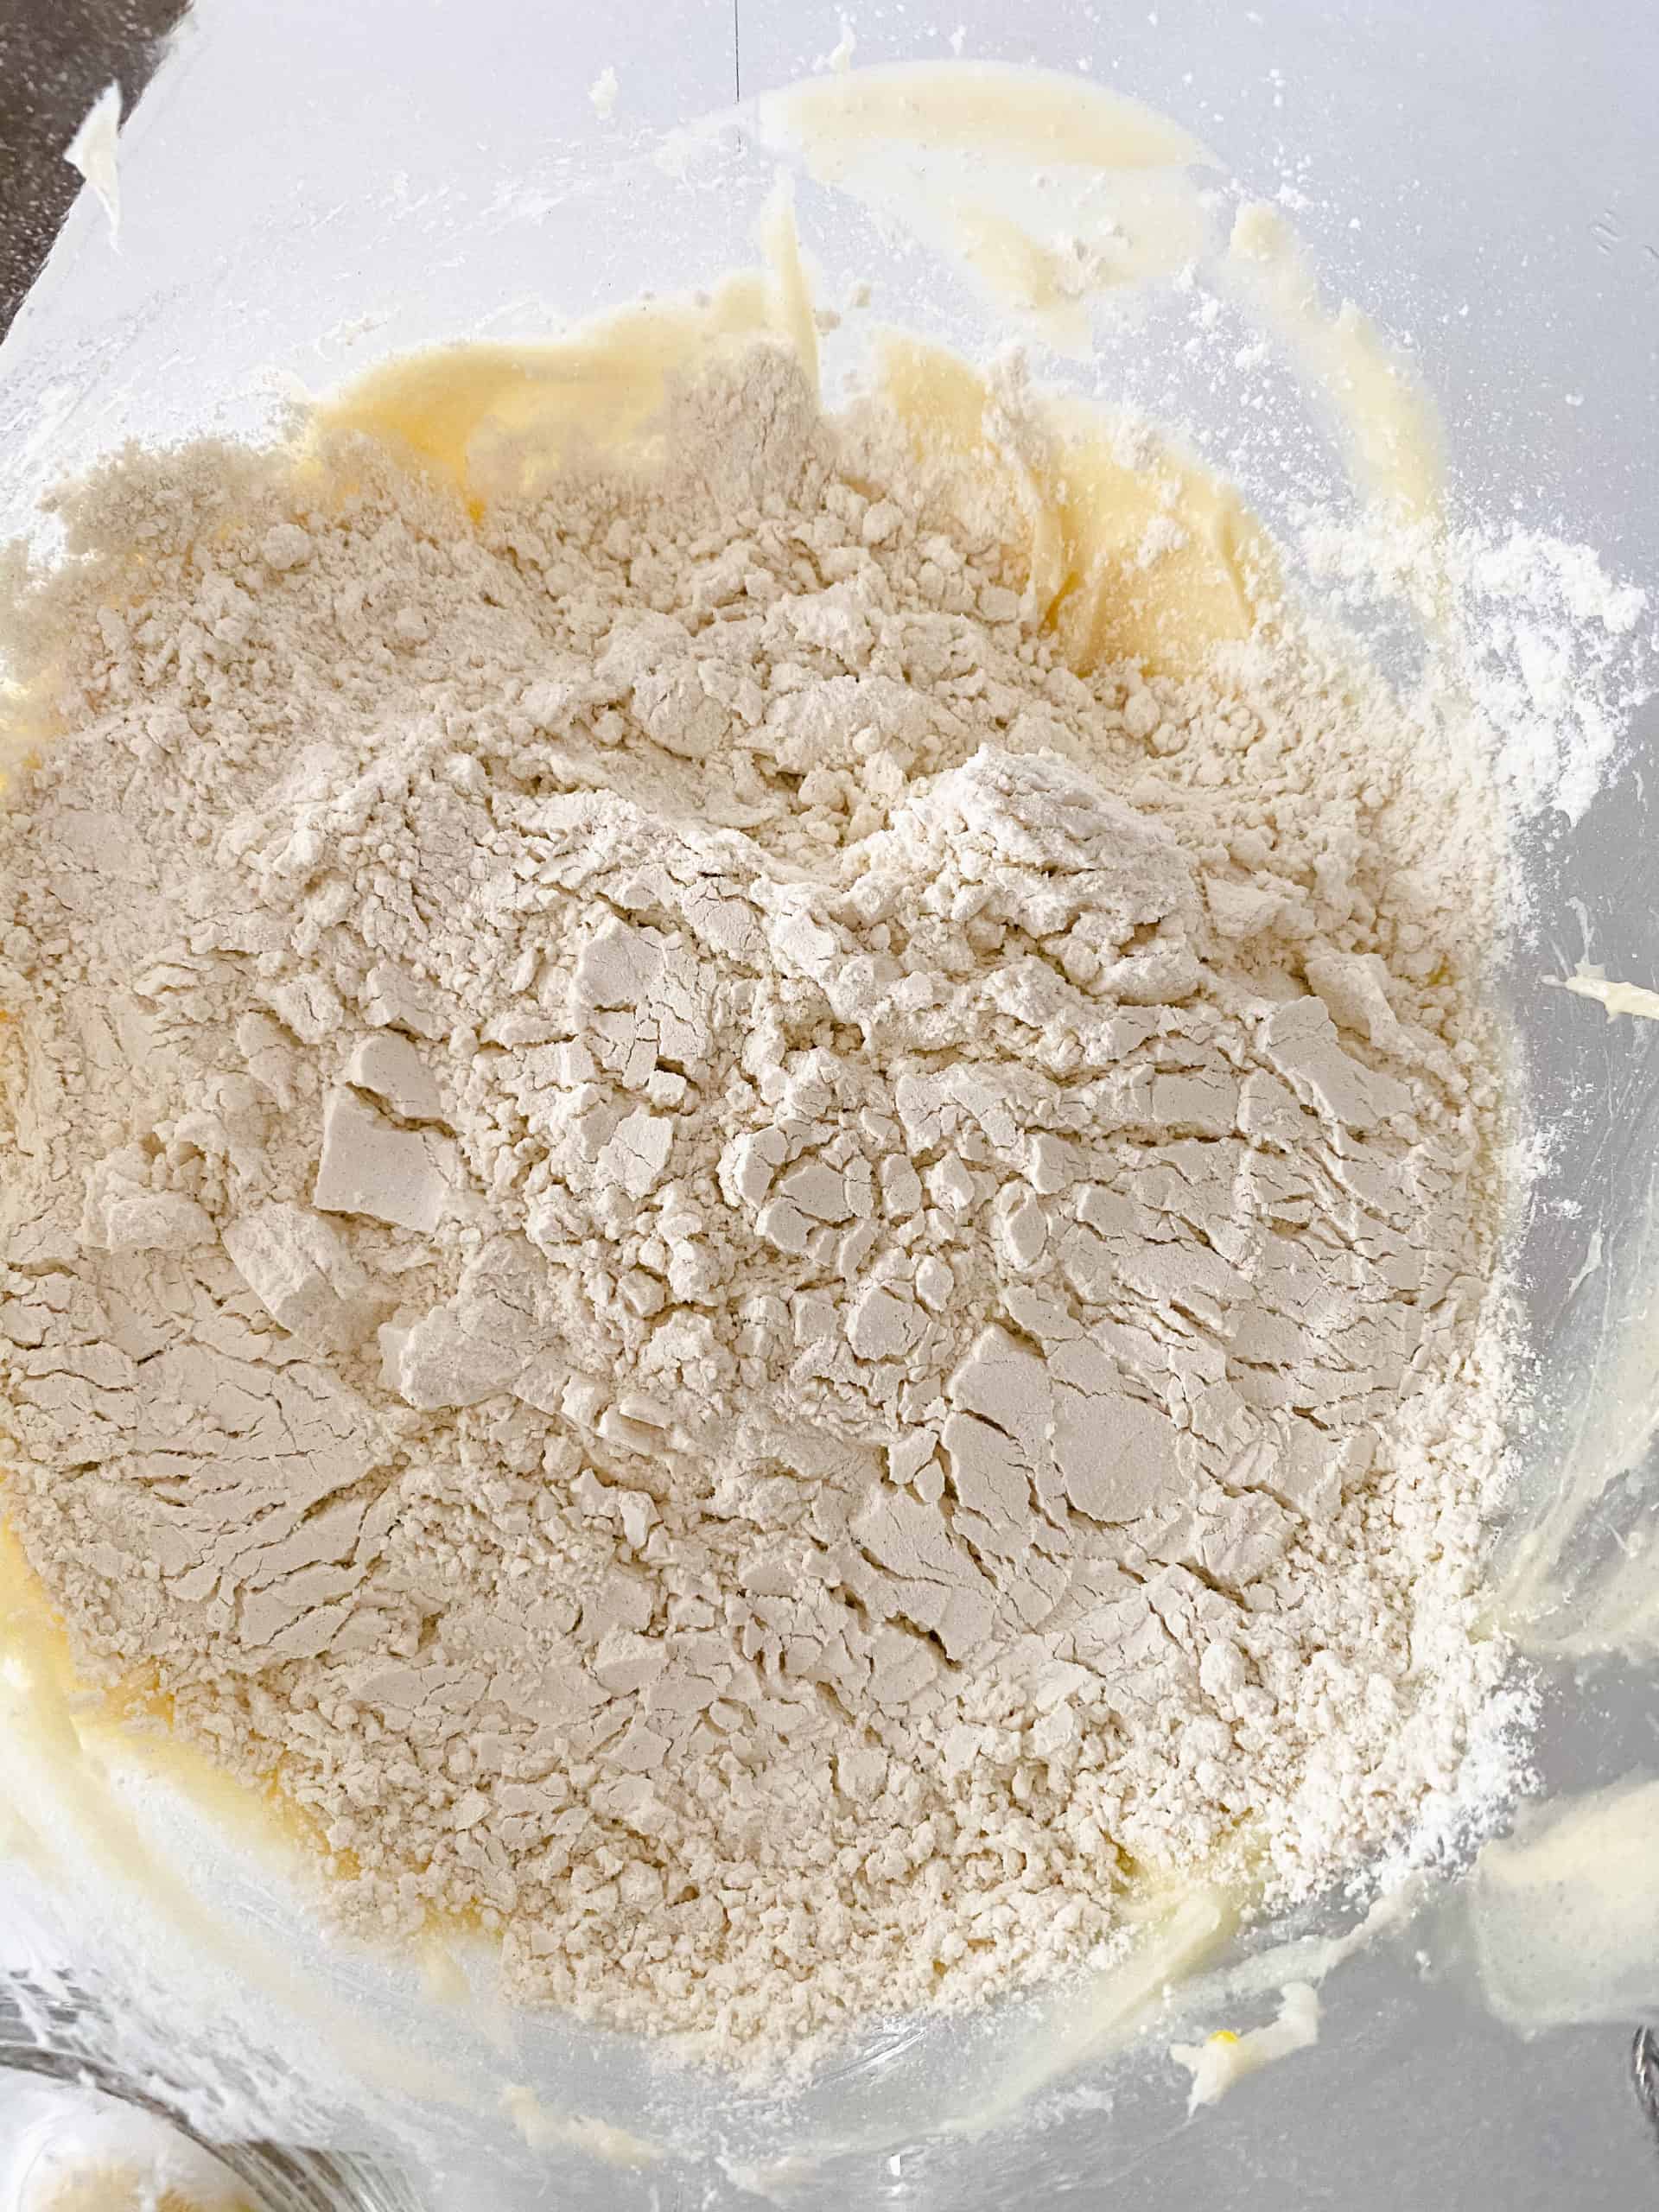 Mixing the flour into the cream cheese mixture.